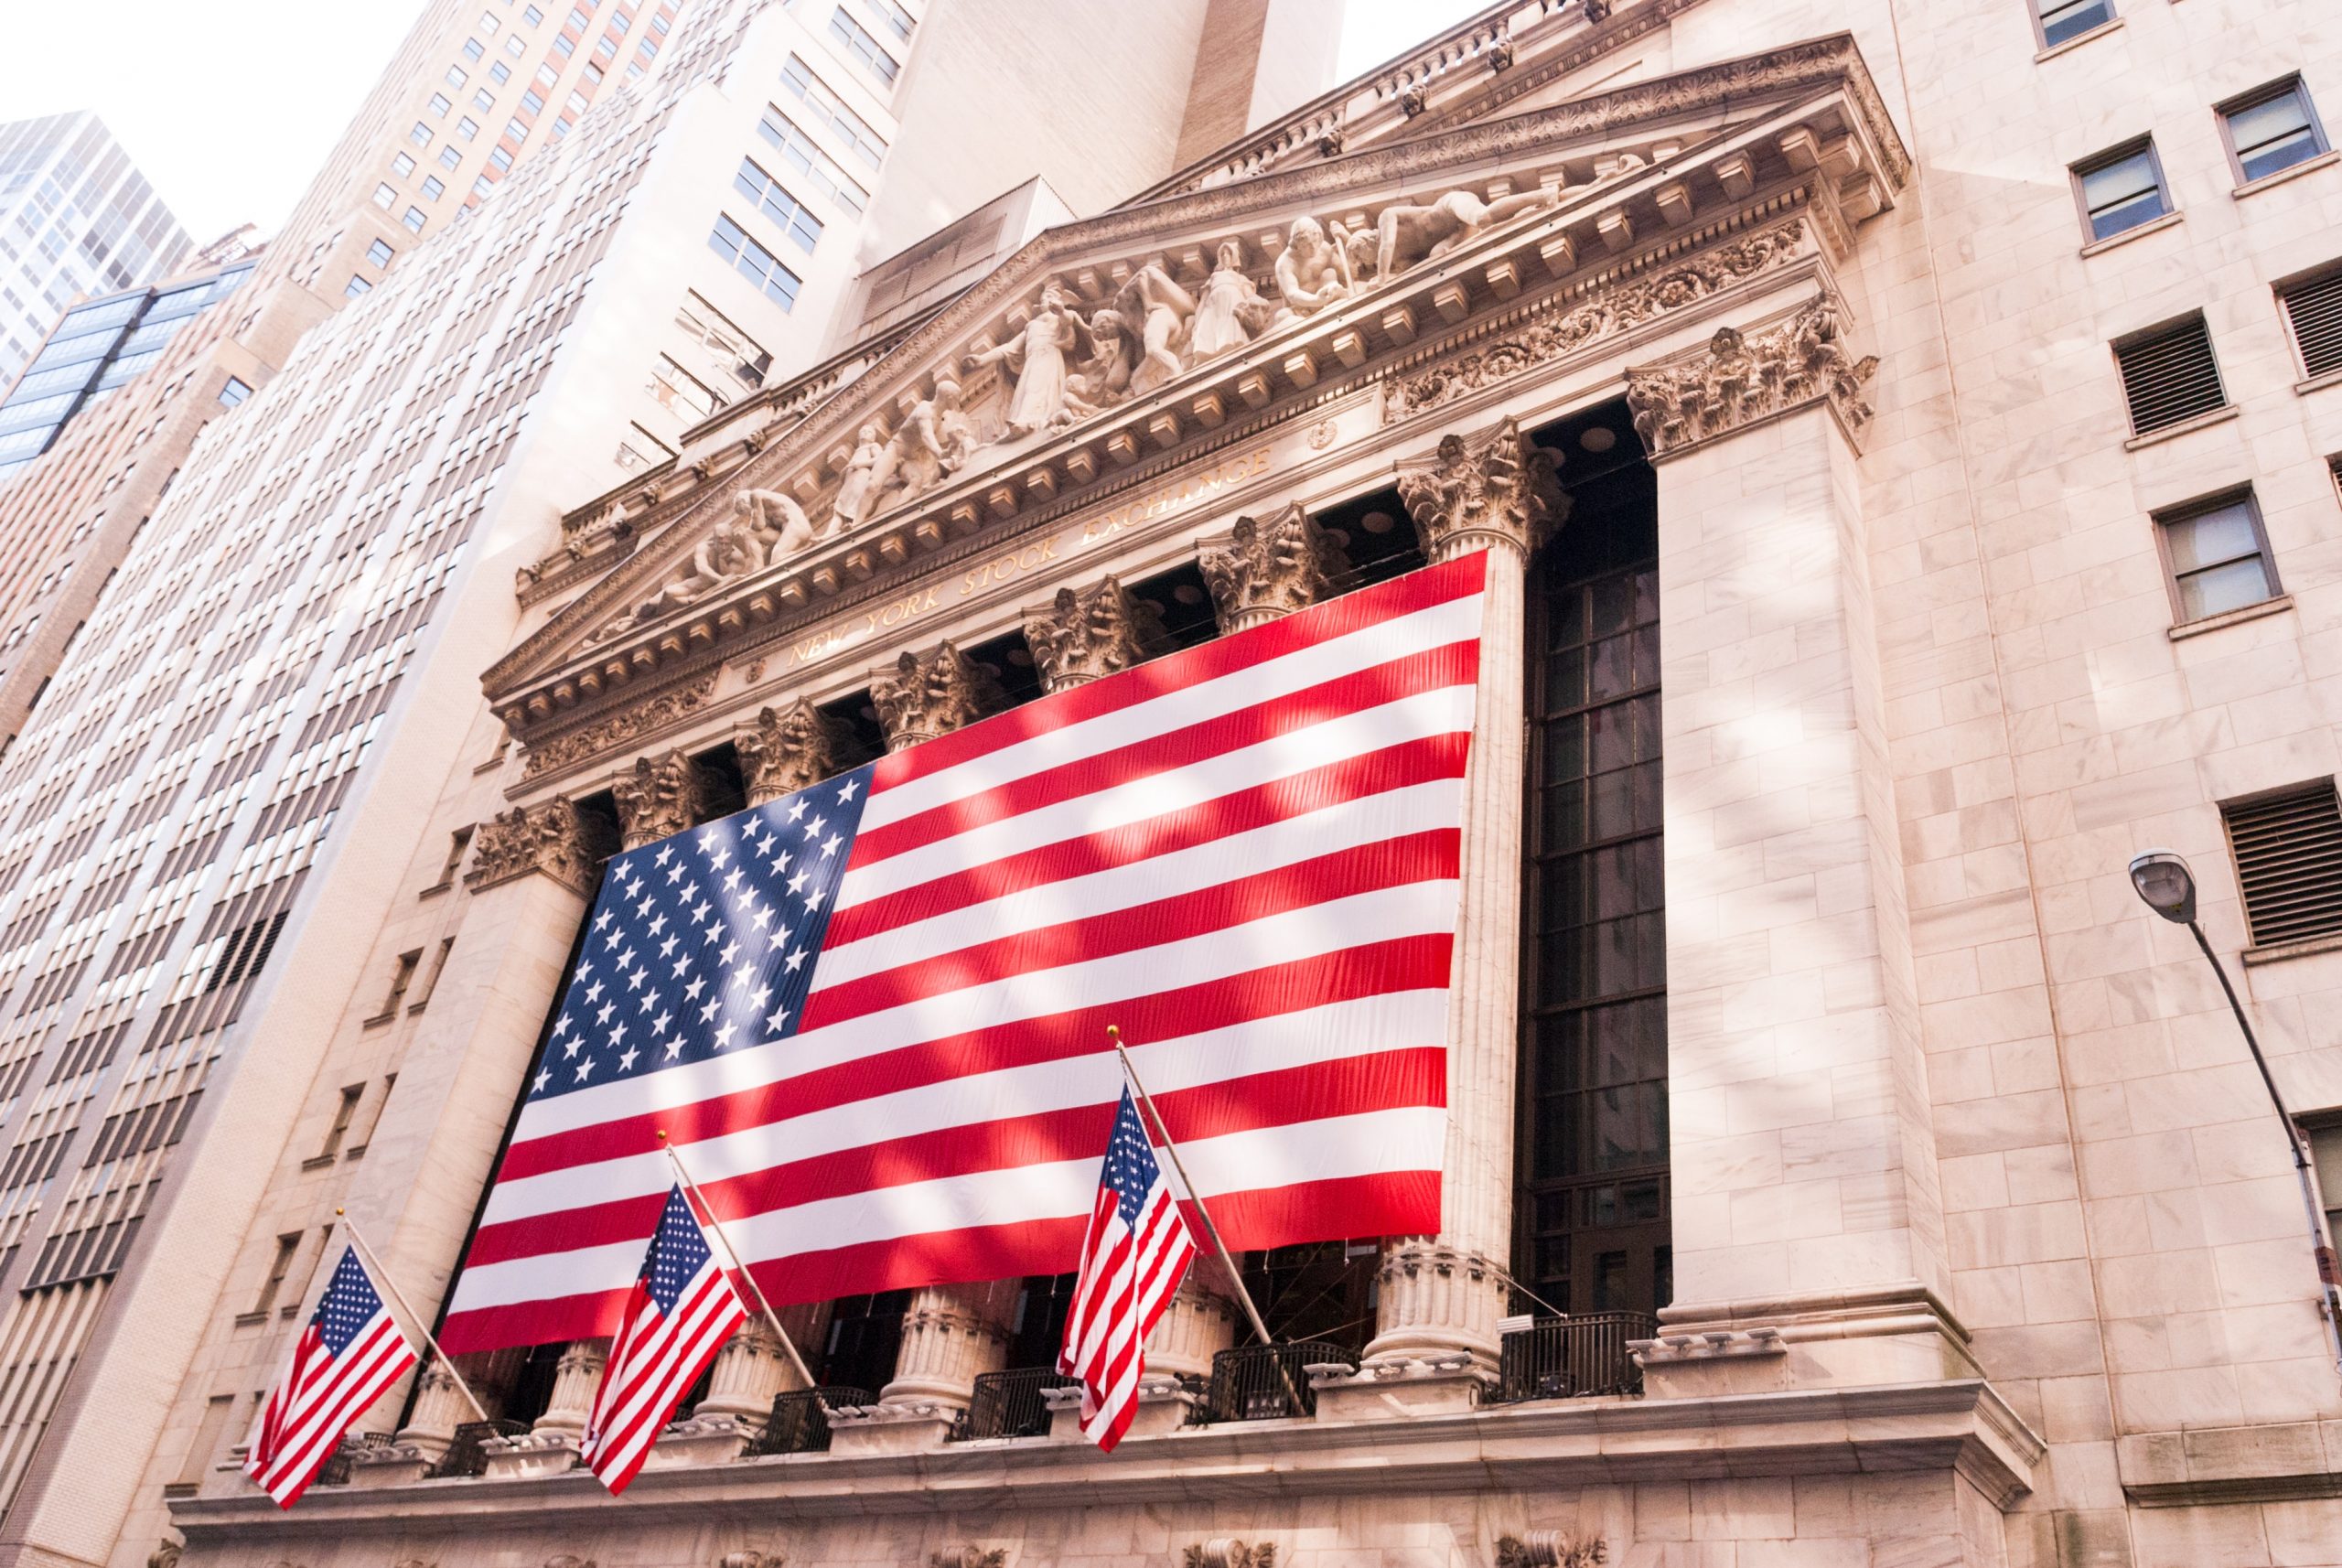 Initial Public Offerings on the New York Stock Exchange